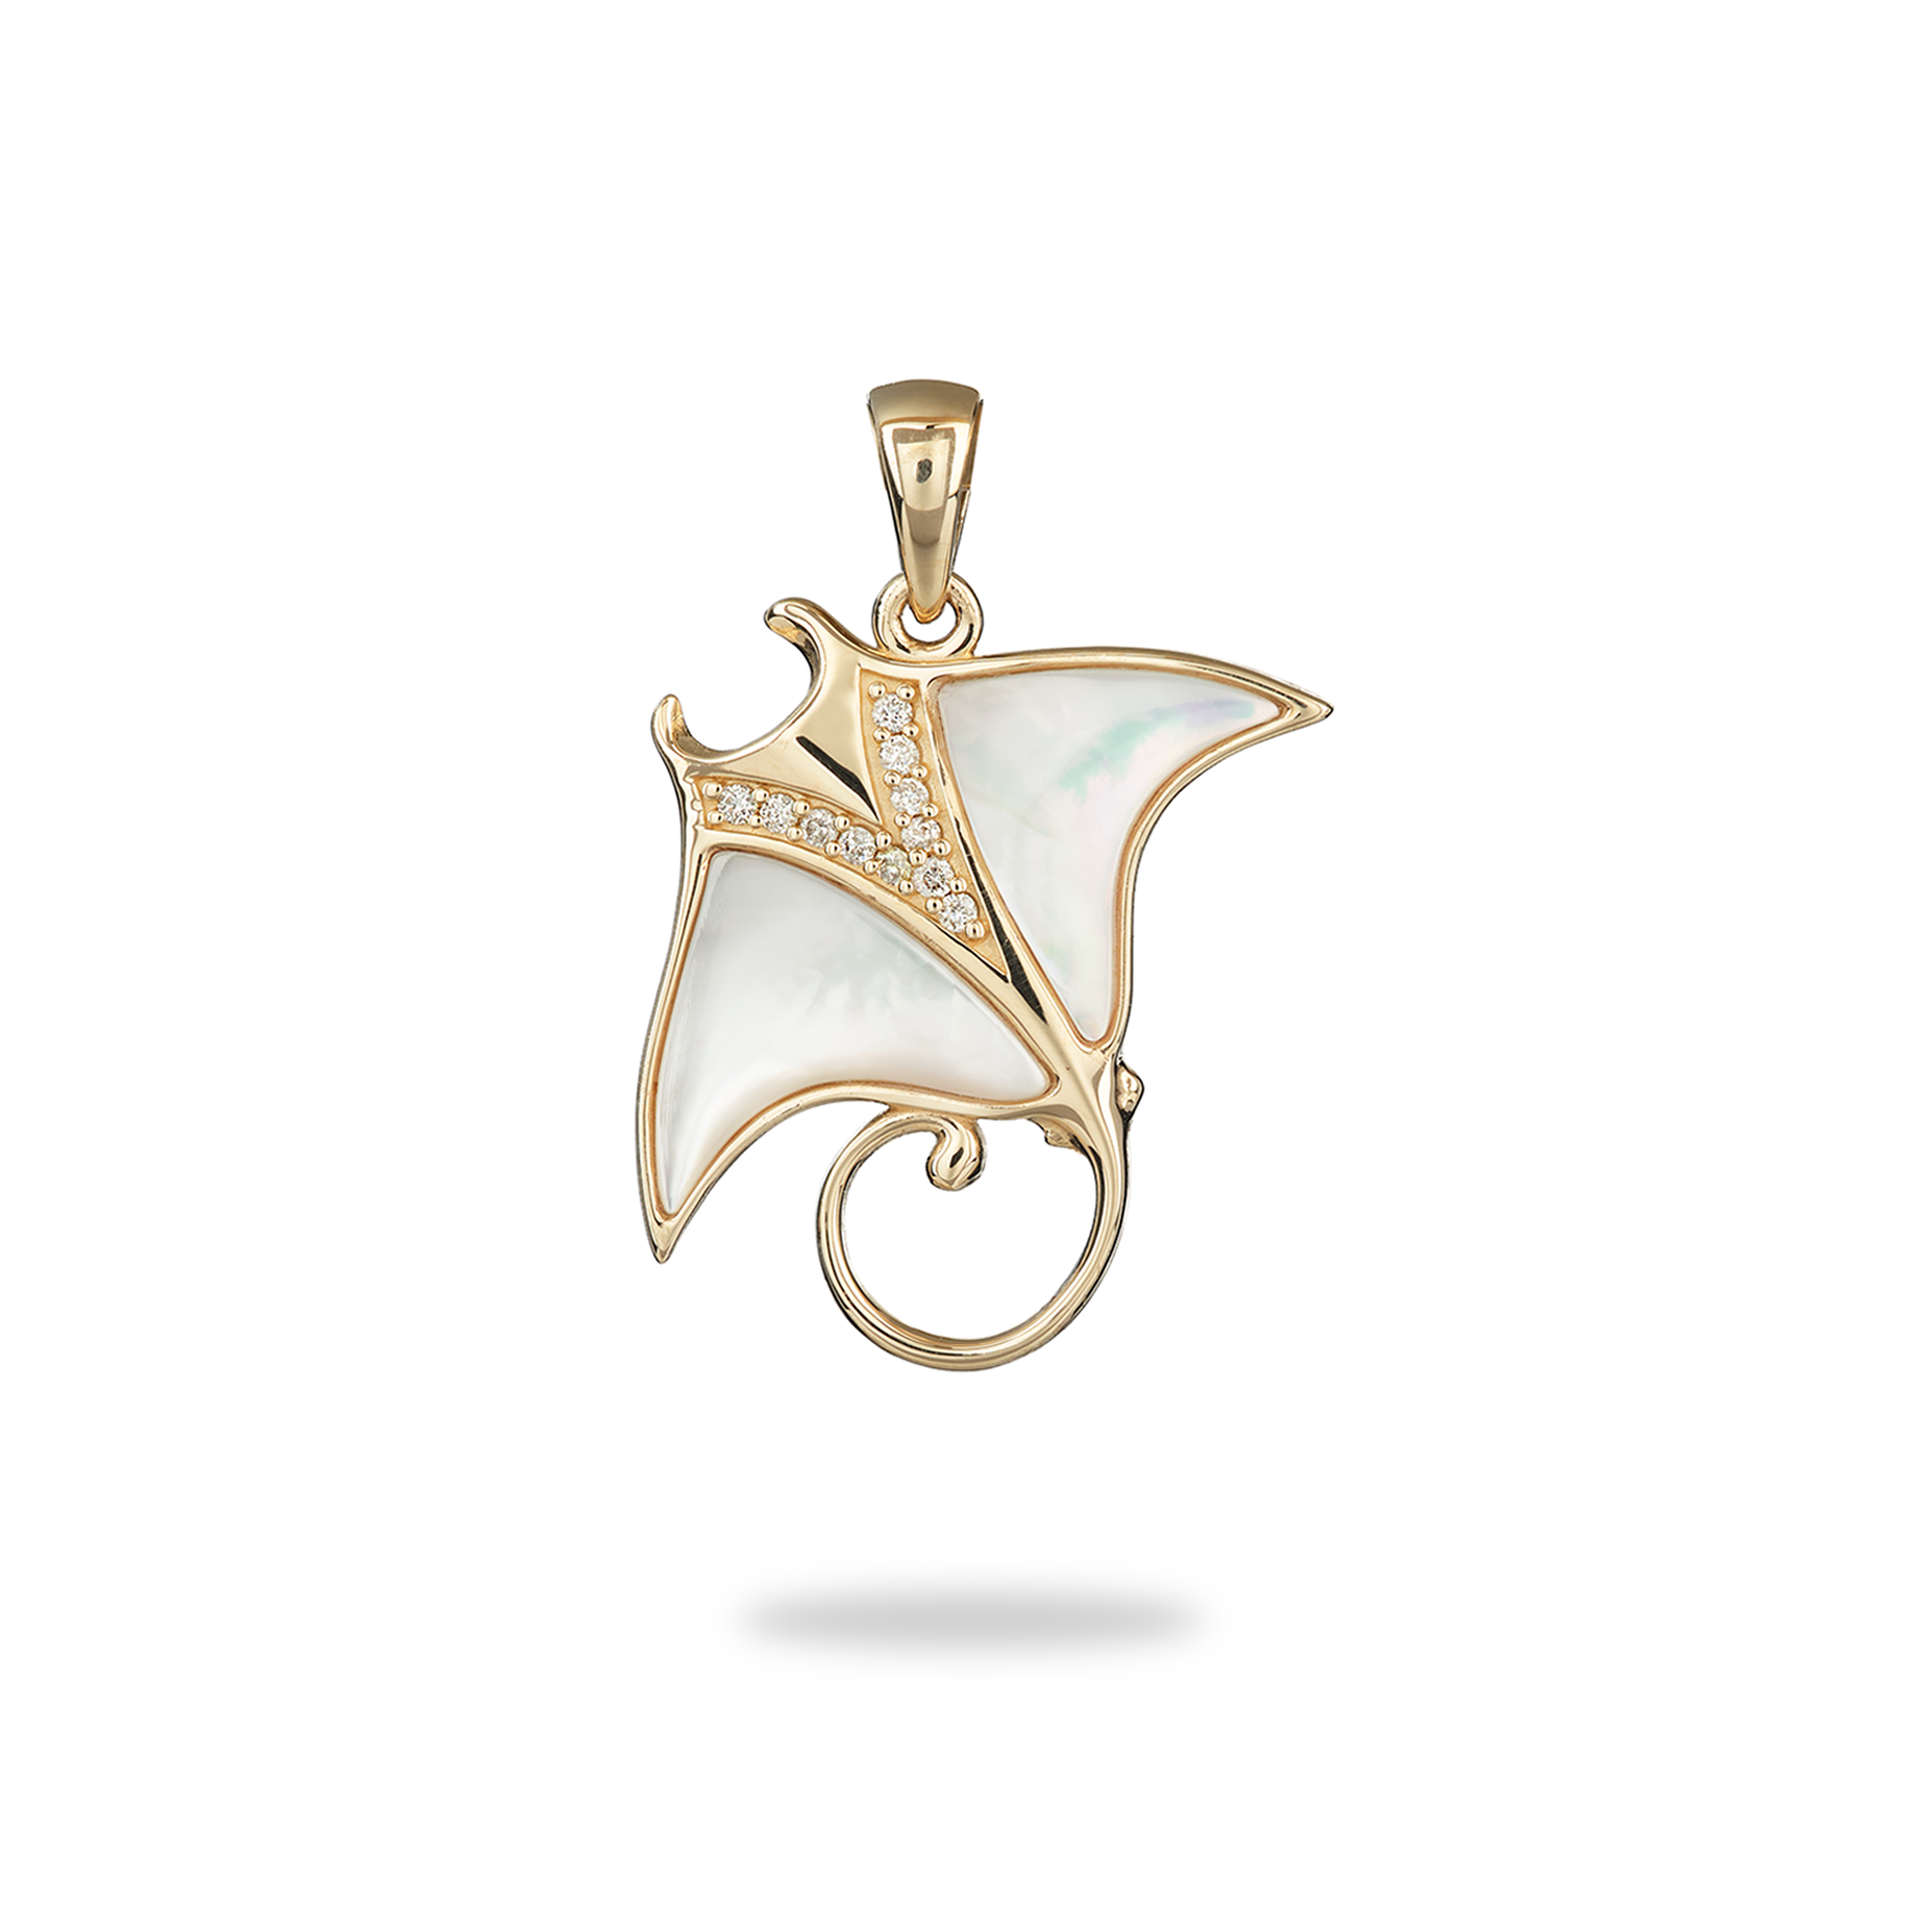 Hammerhead Shark Mother of Pearl Pendant in Gold with Diamonds - 34mm